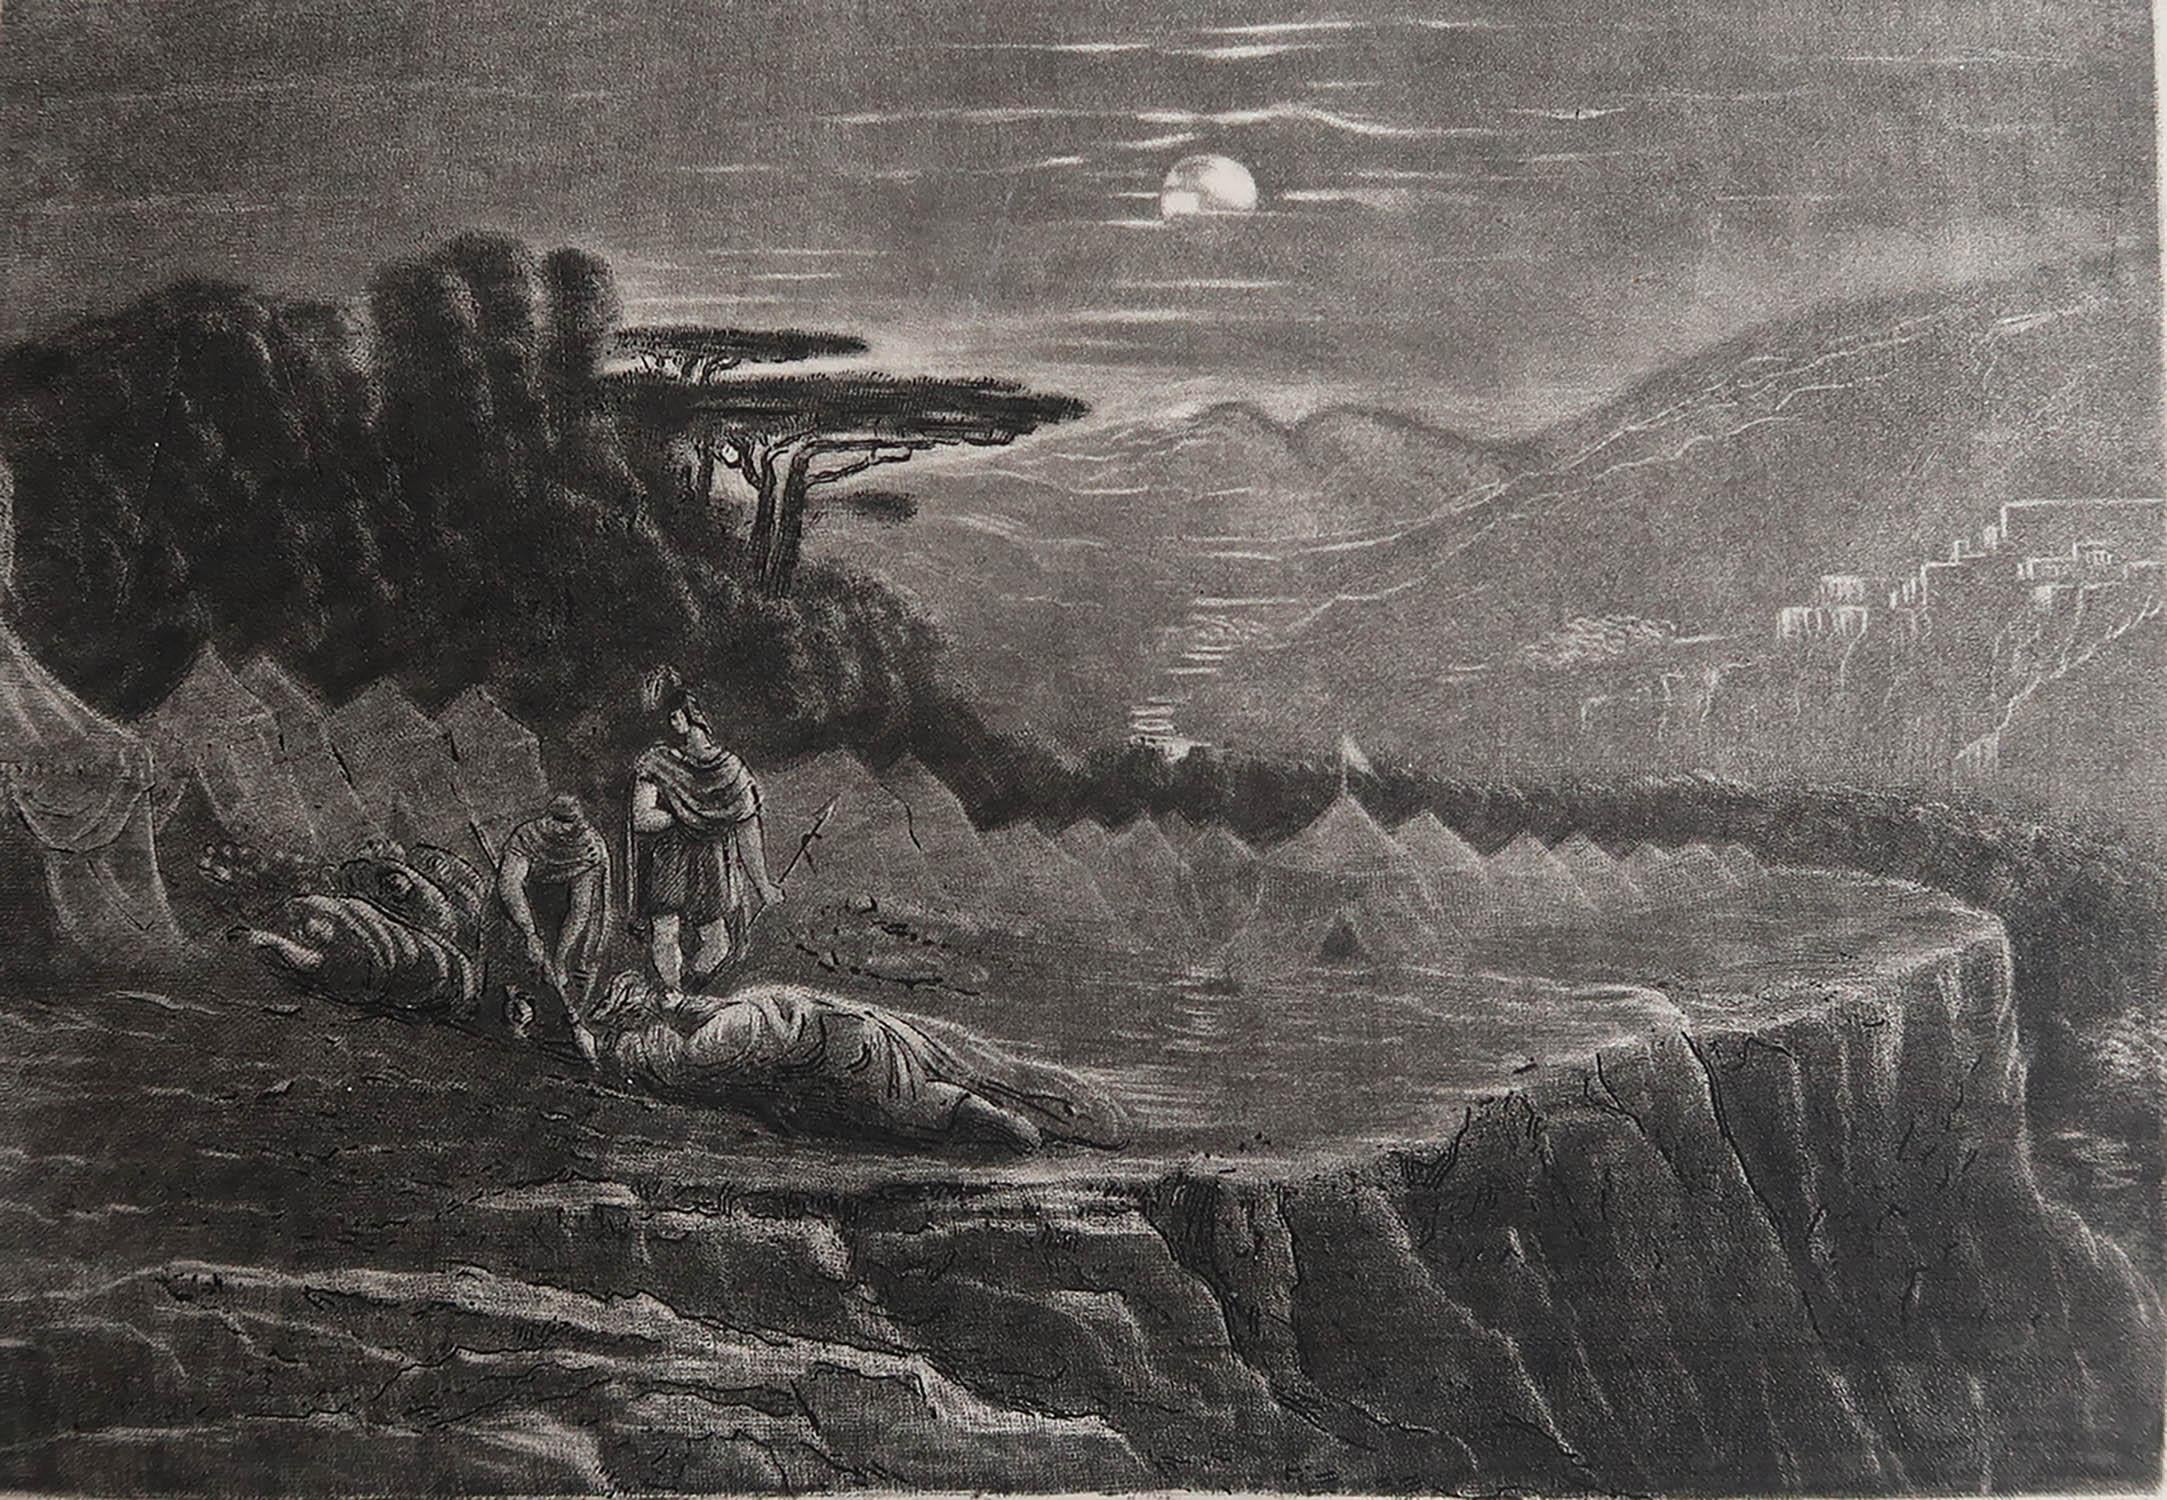 Sensational image by John Martin.

Drawn and engraved by John Martin. 

Published by Sangster

Unframed.

